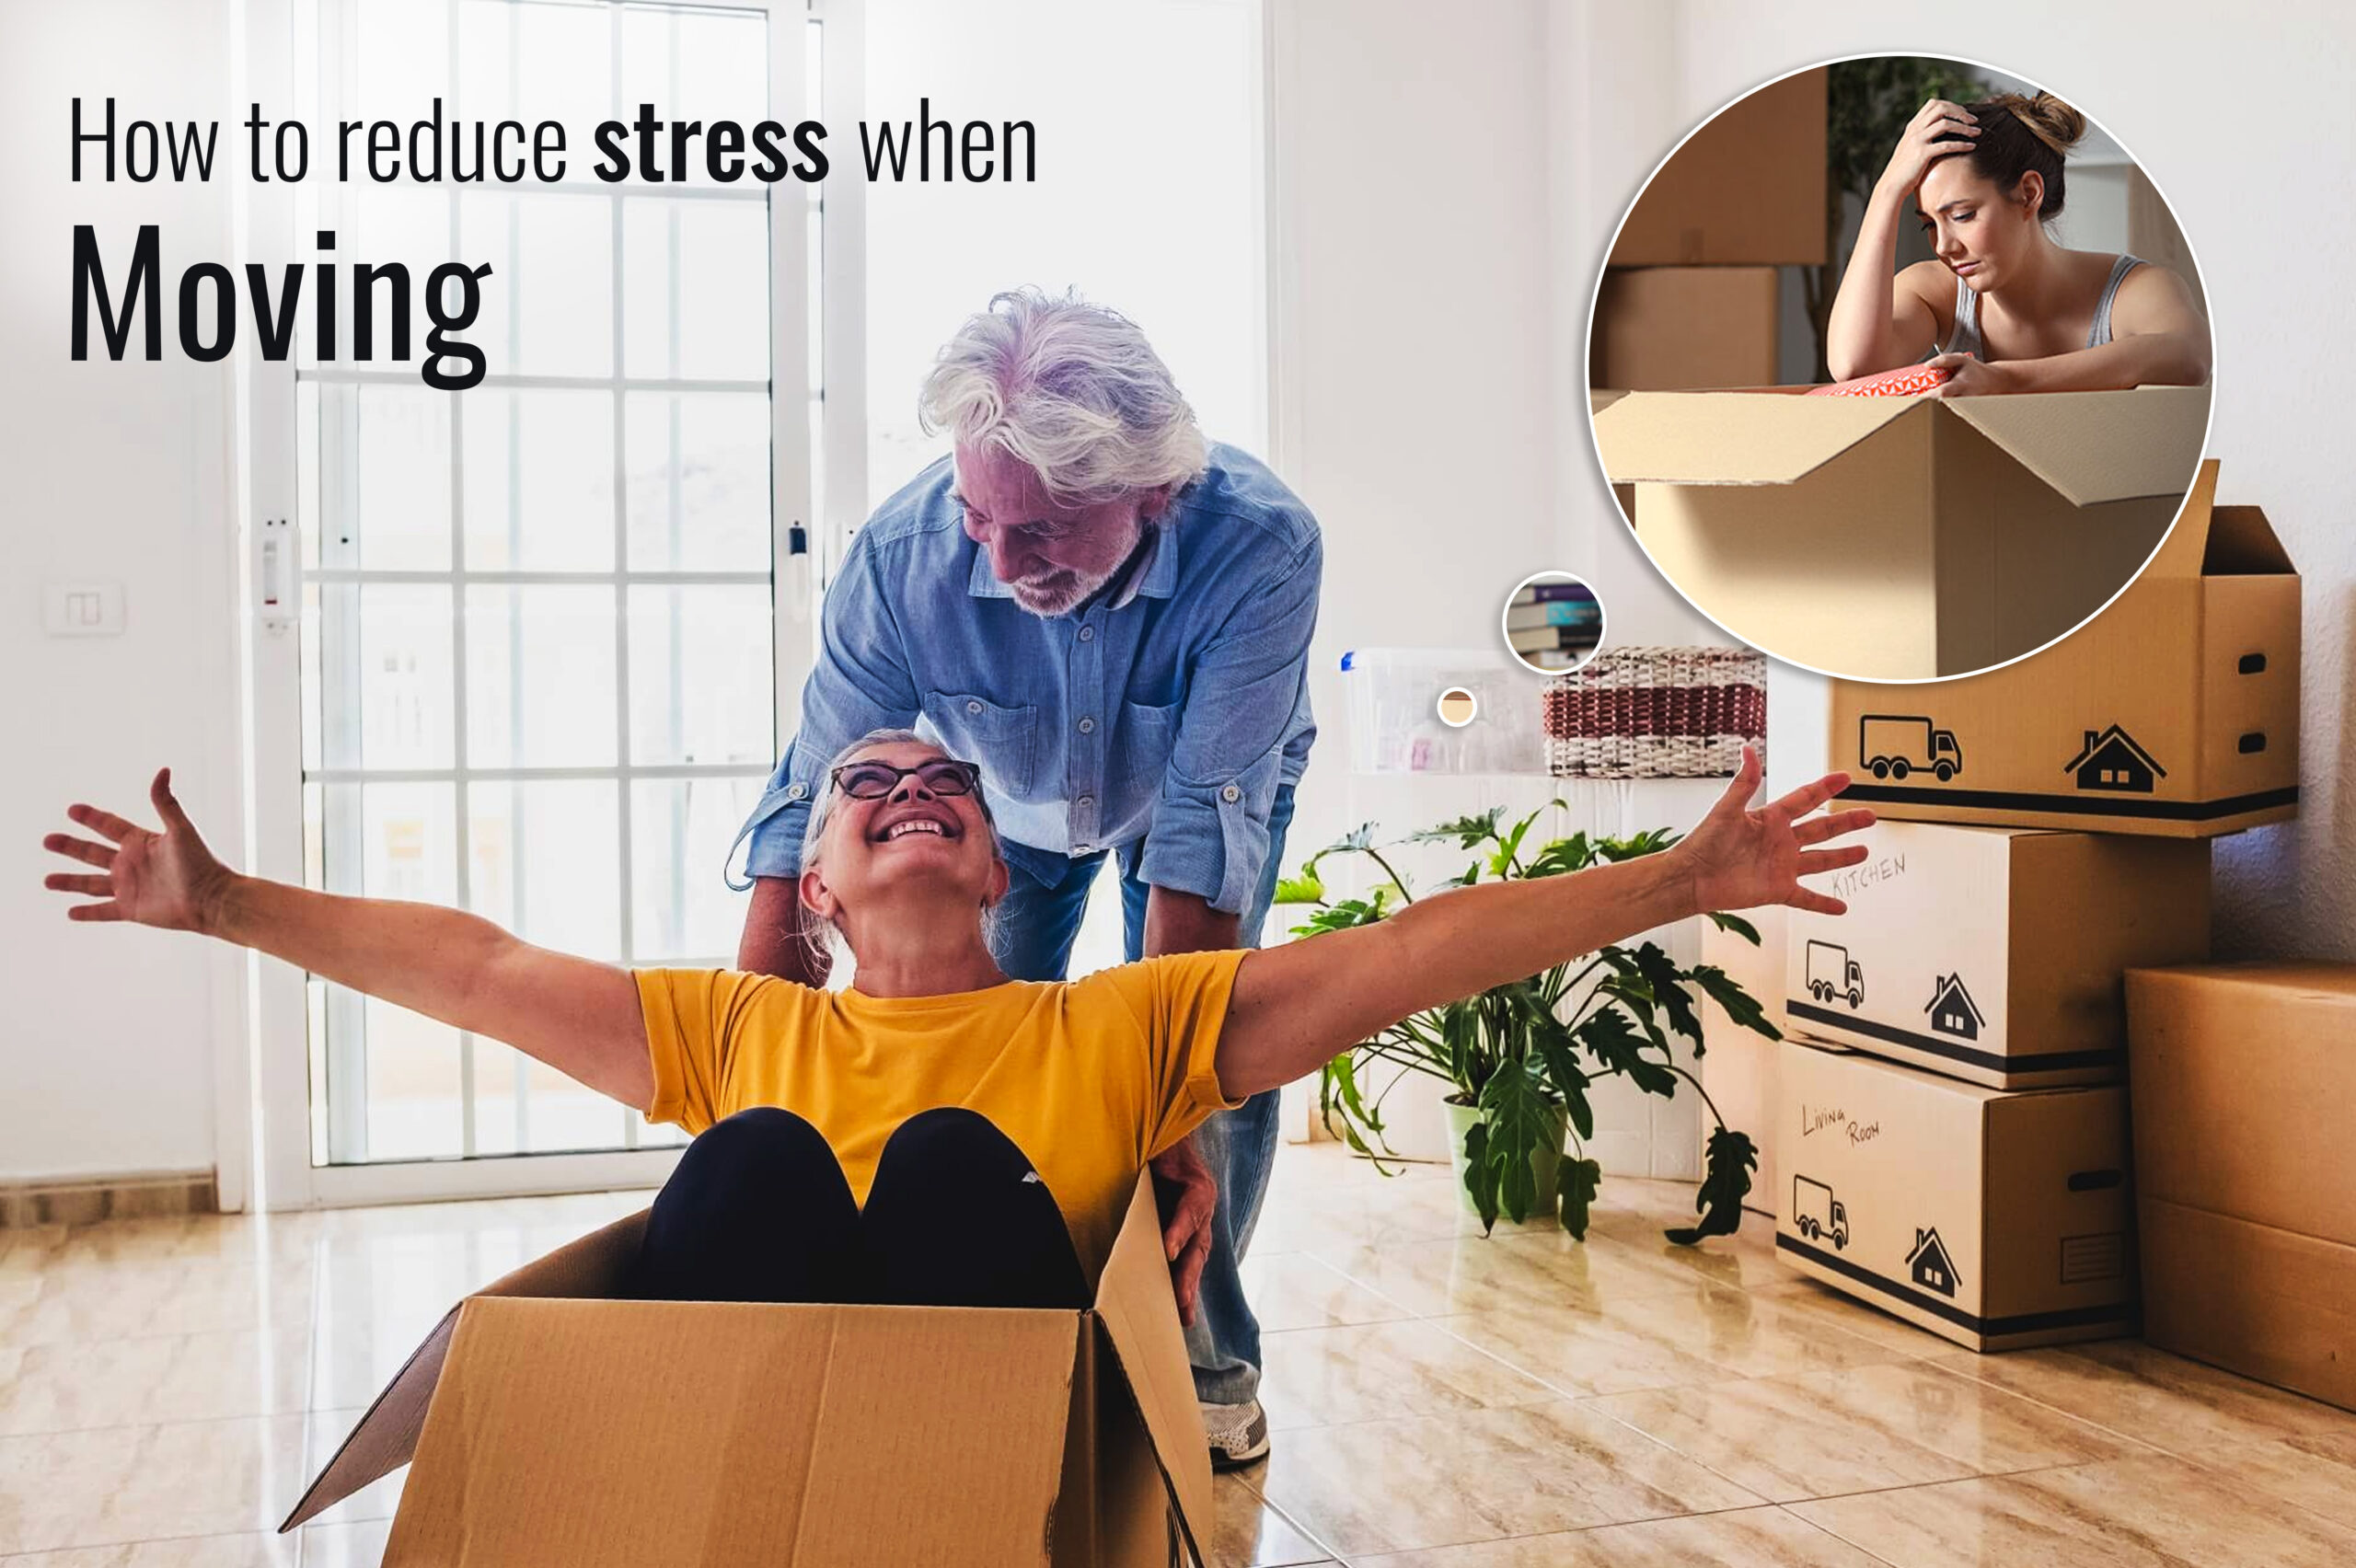 How-To-Reduce-Stress When-Moving